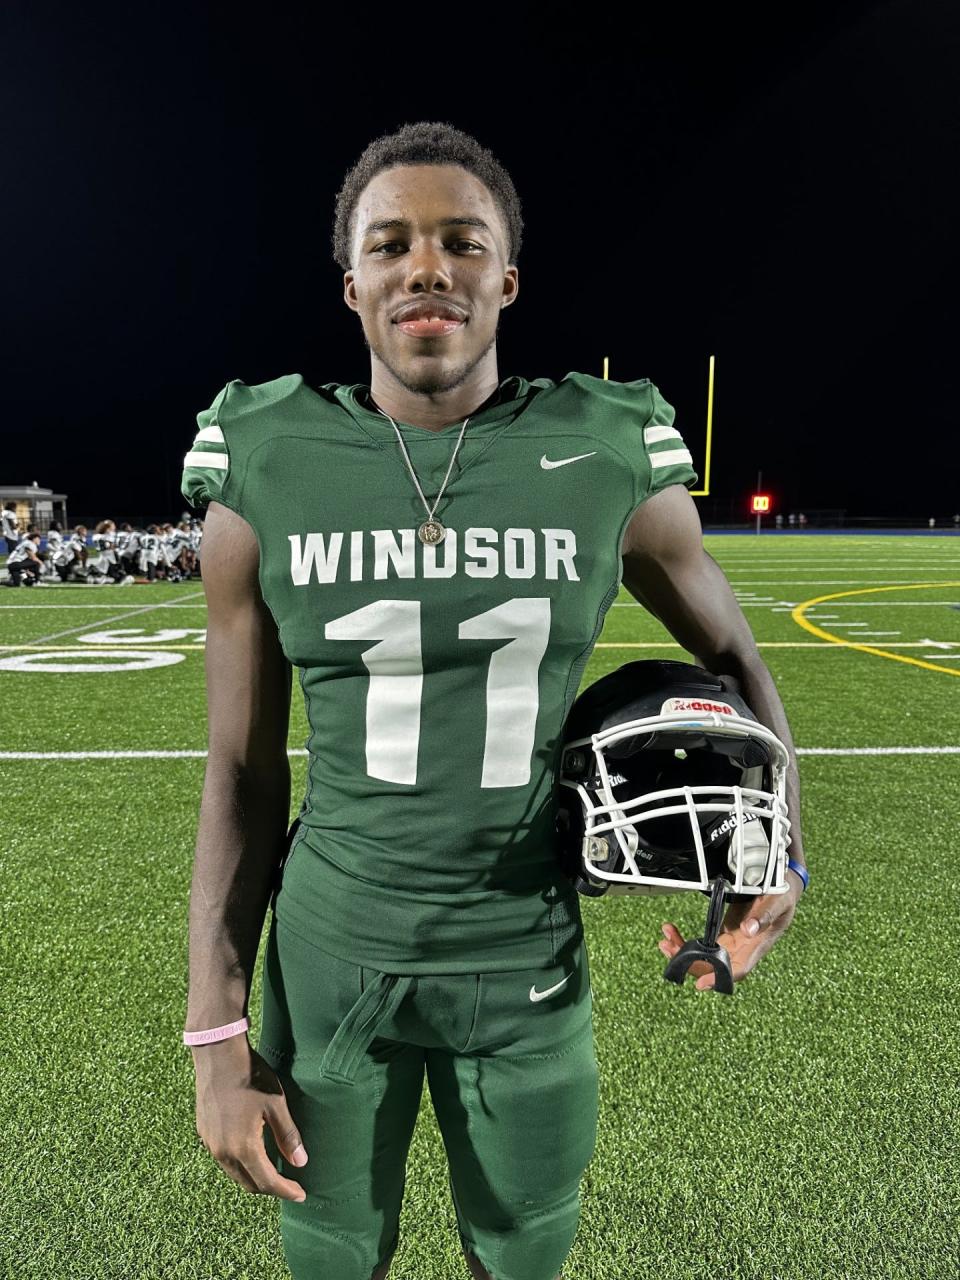 Marquis Lonnon of the Windsor Forest football team.